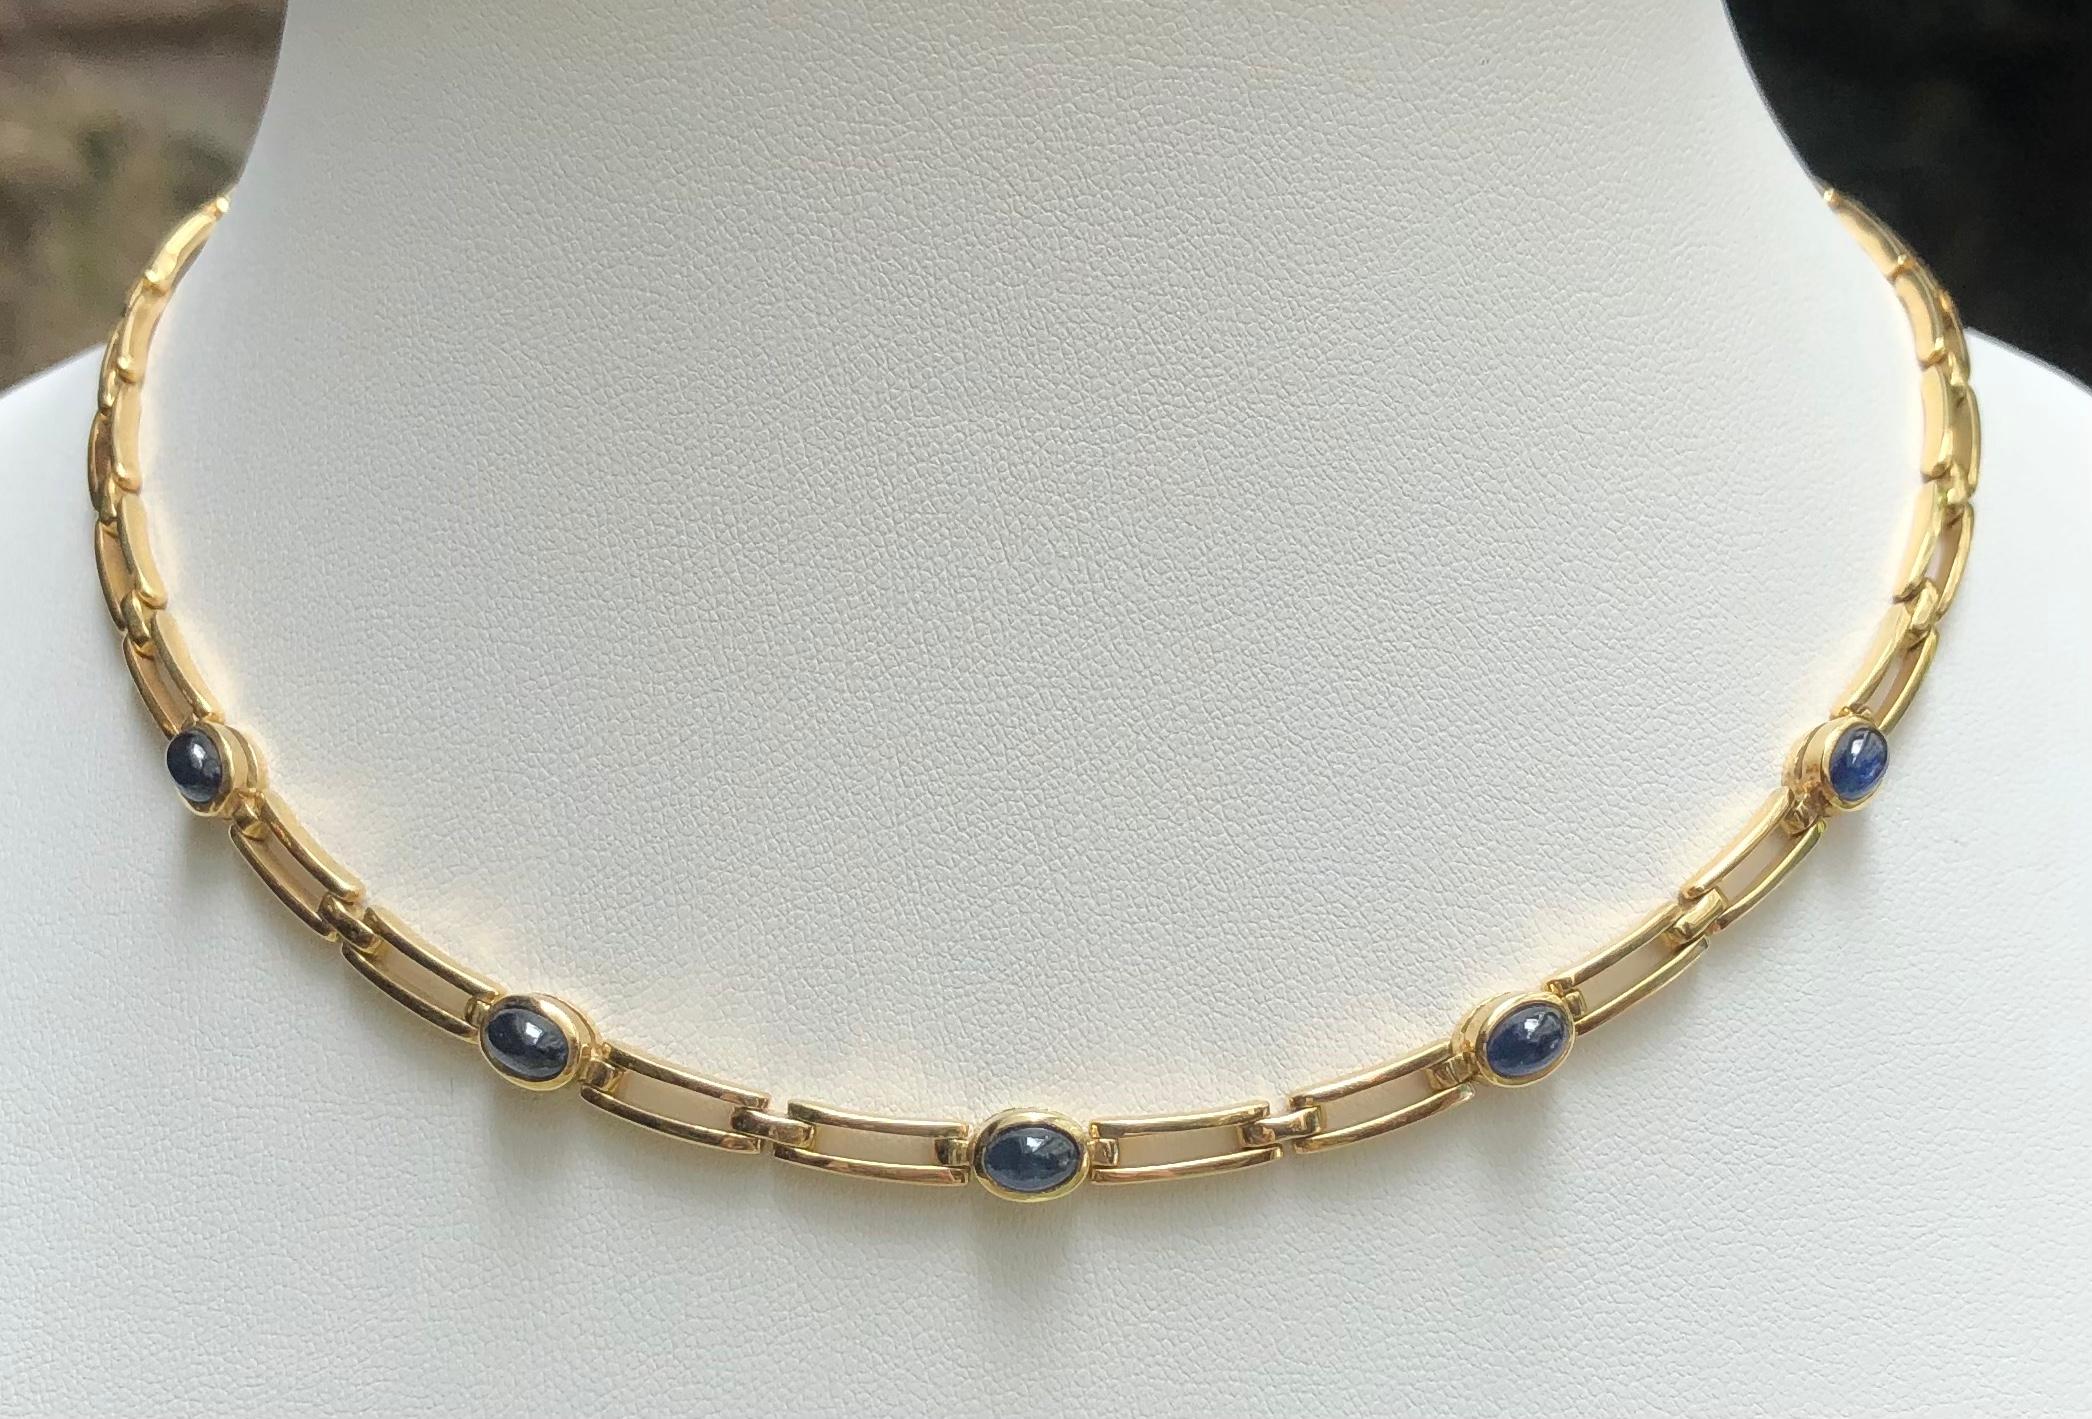 Cabochon Blue Sapphire 4.42 carats Necklace set in 18 Karat Gold Settings

Width:  0.5 cm 
Length: 40.0 cm
Total Weight: 36.55 grams

